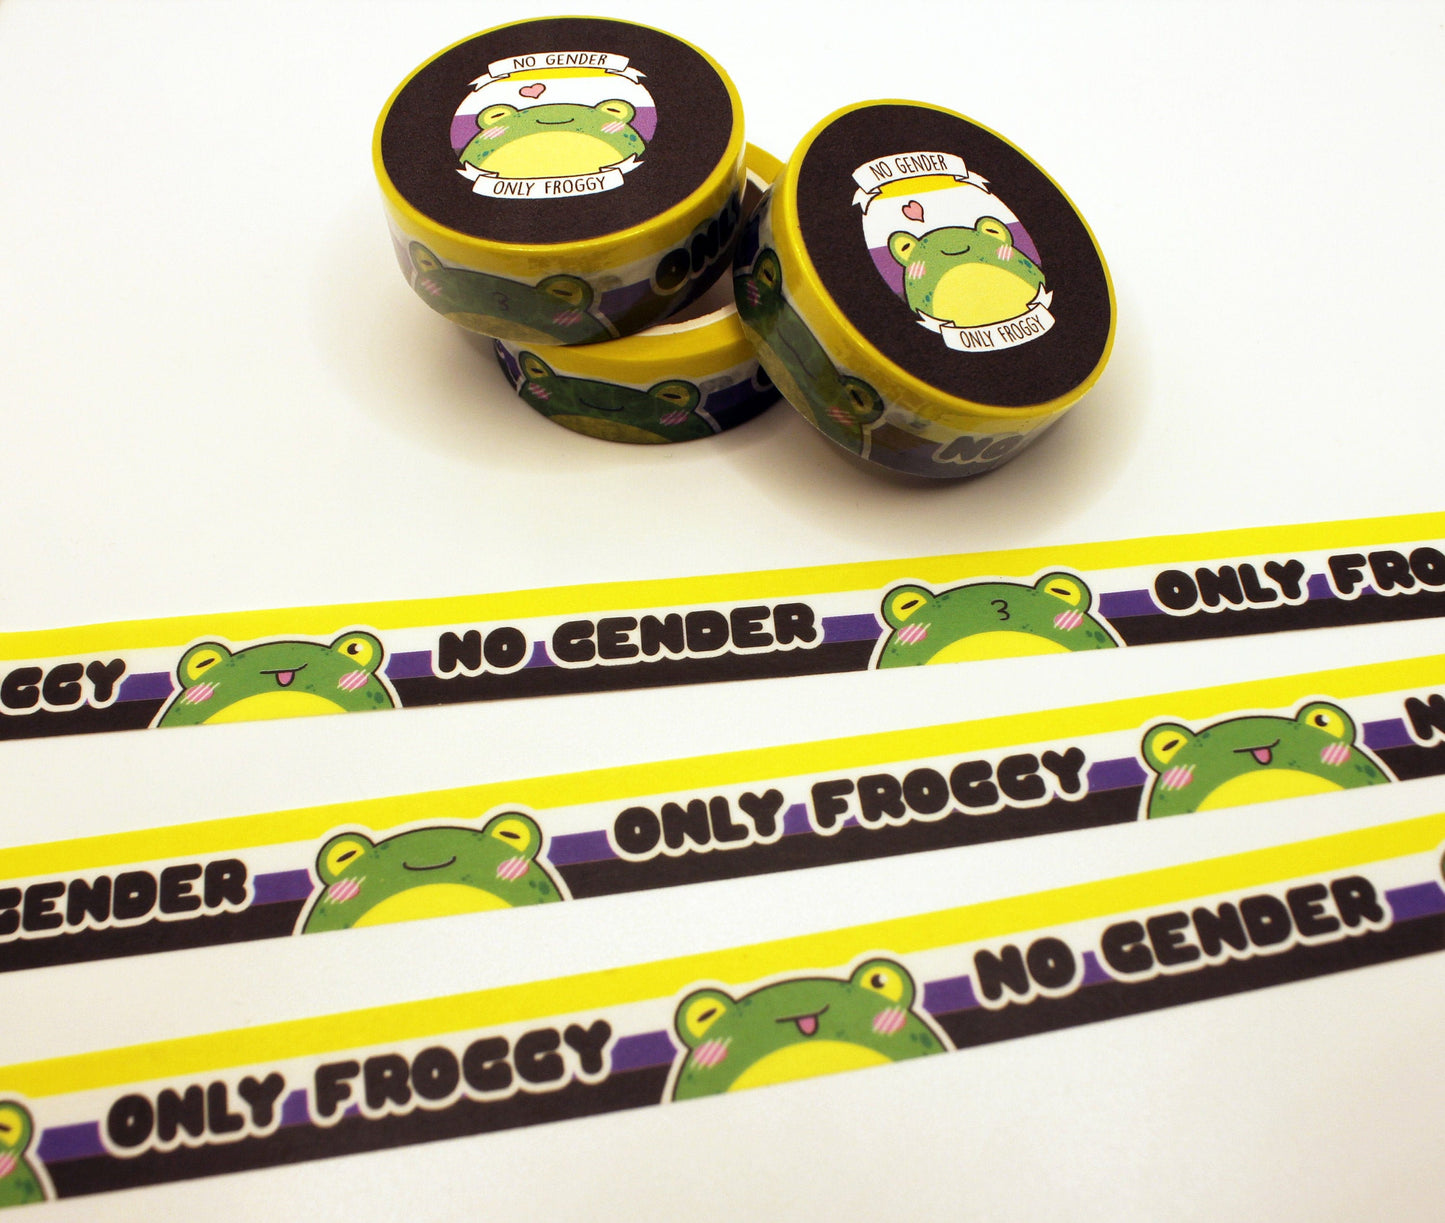 No Gender Only Froggy Washi Tape 1.5cm x 10m